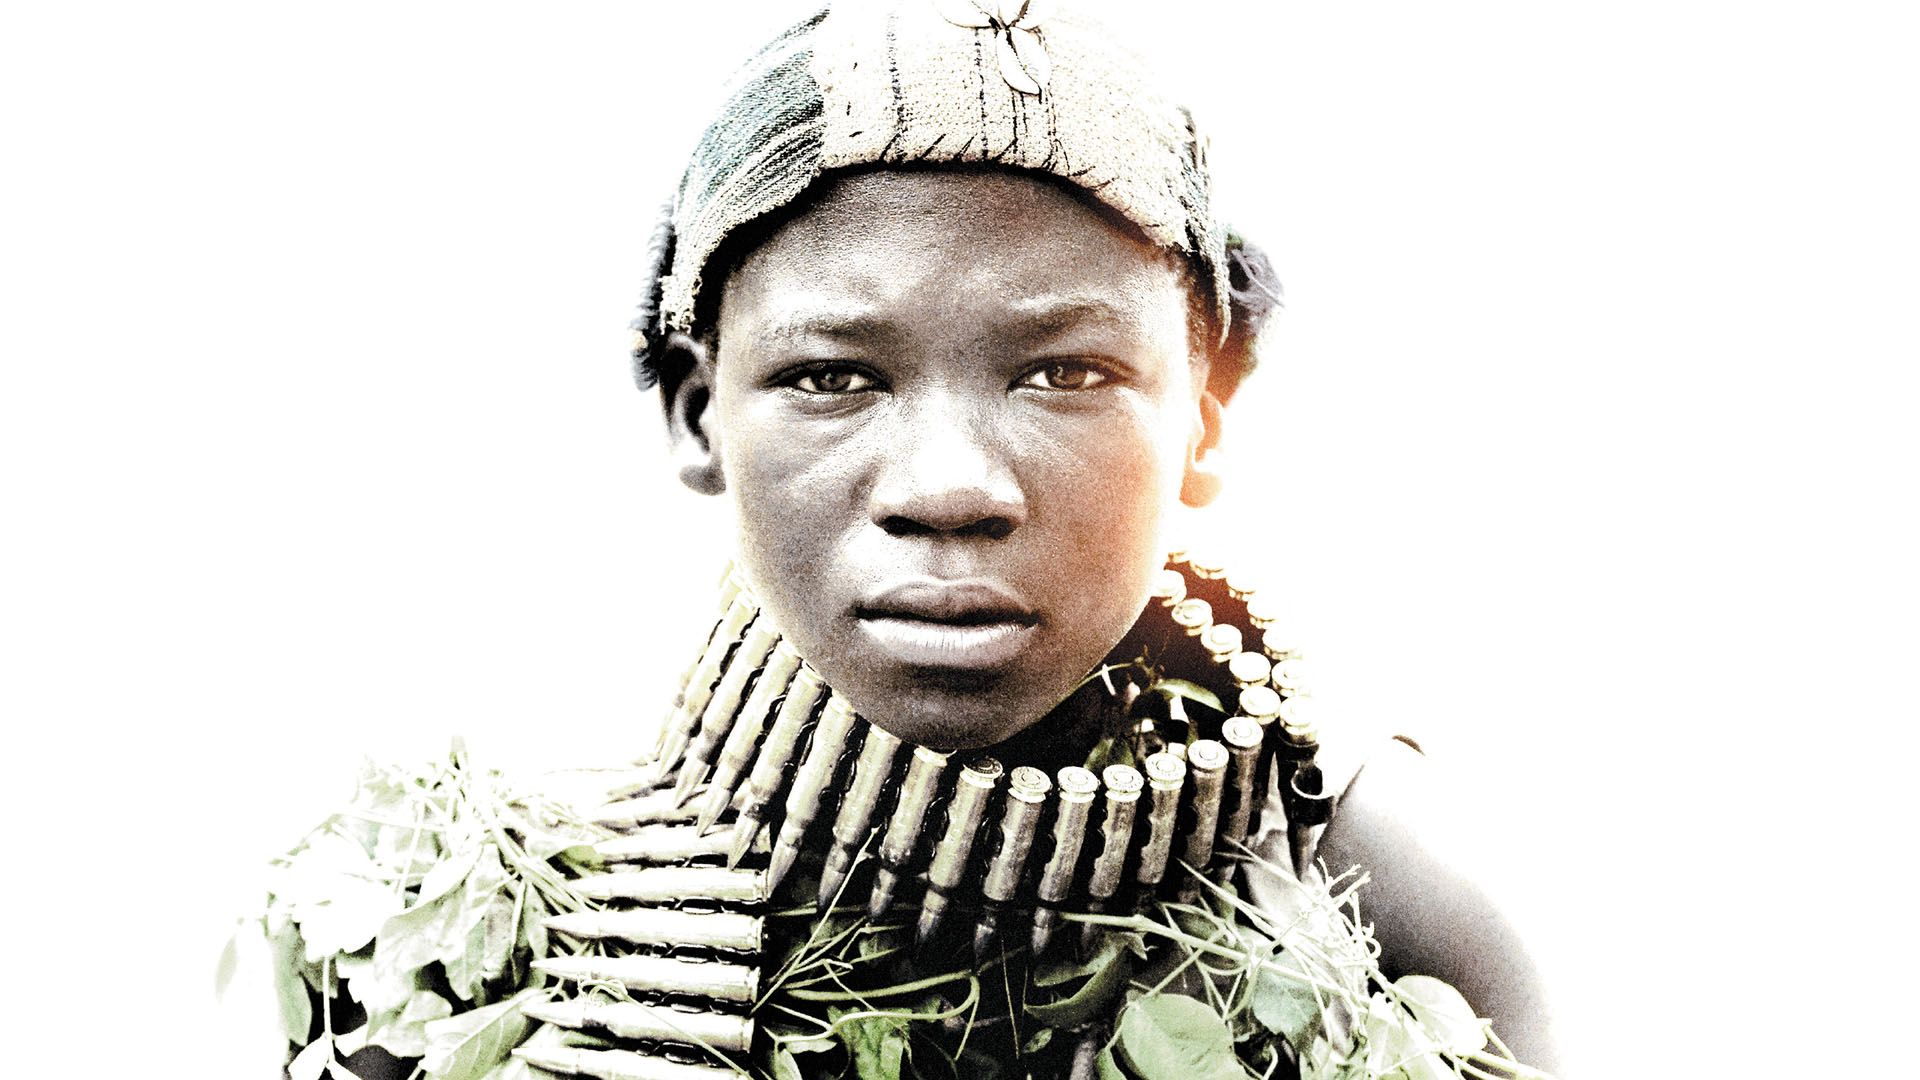 Beasts of No Nation background